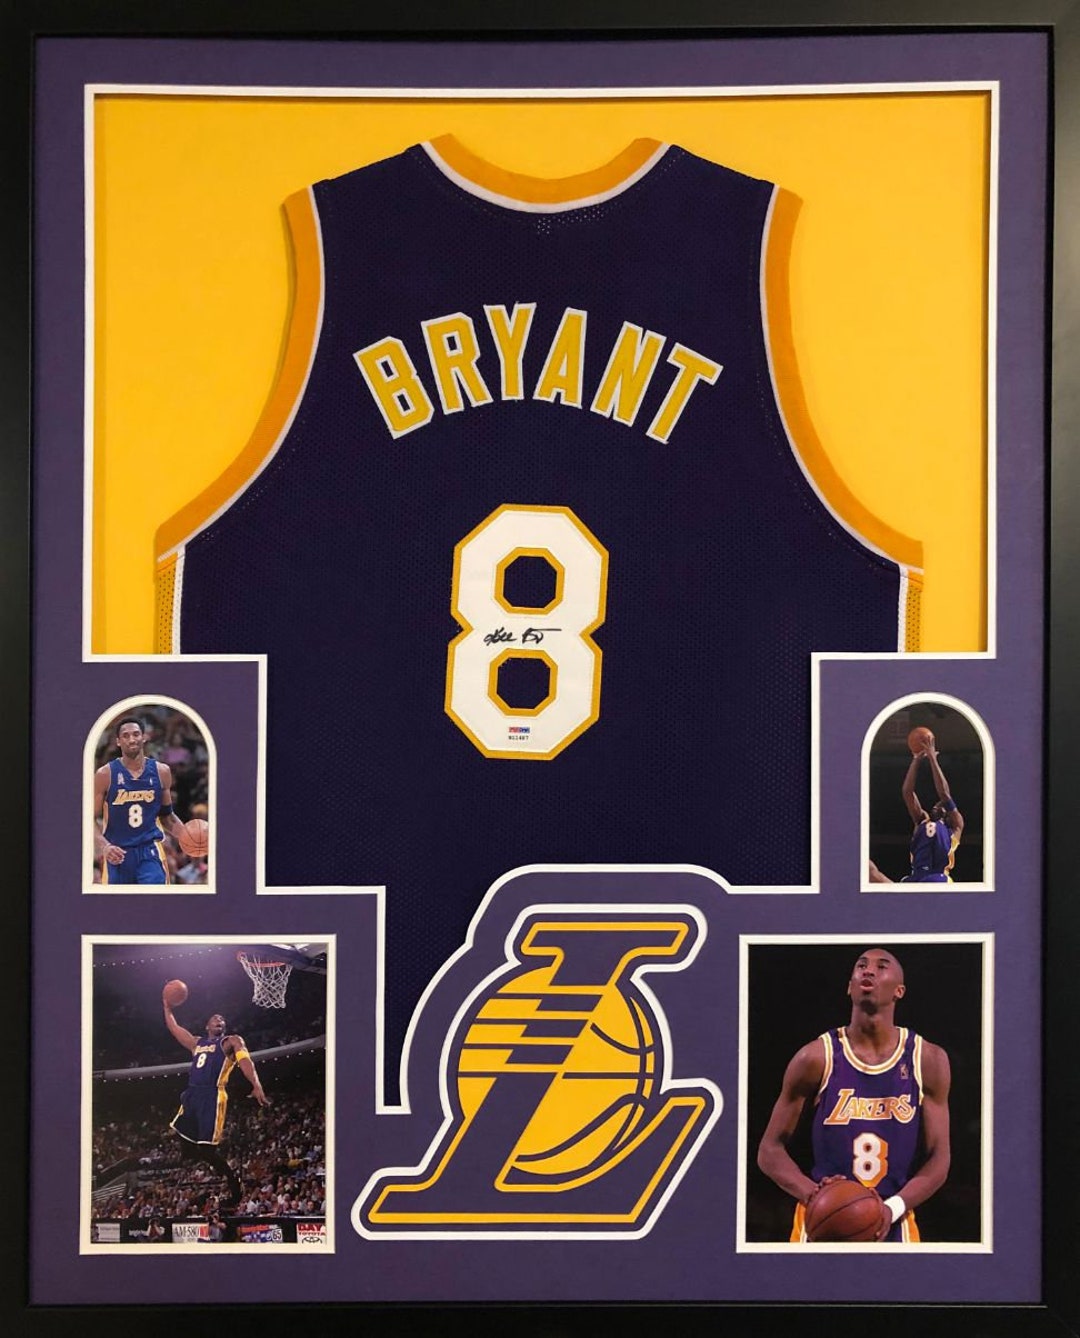 Los Angeles Lakers #8 Kobe Bryant Retro NBA Basketball Jersey -S.M.L.XL.2X  for Sale in Crystal City, CA - OfferUp